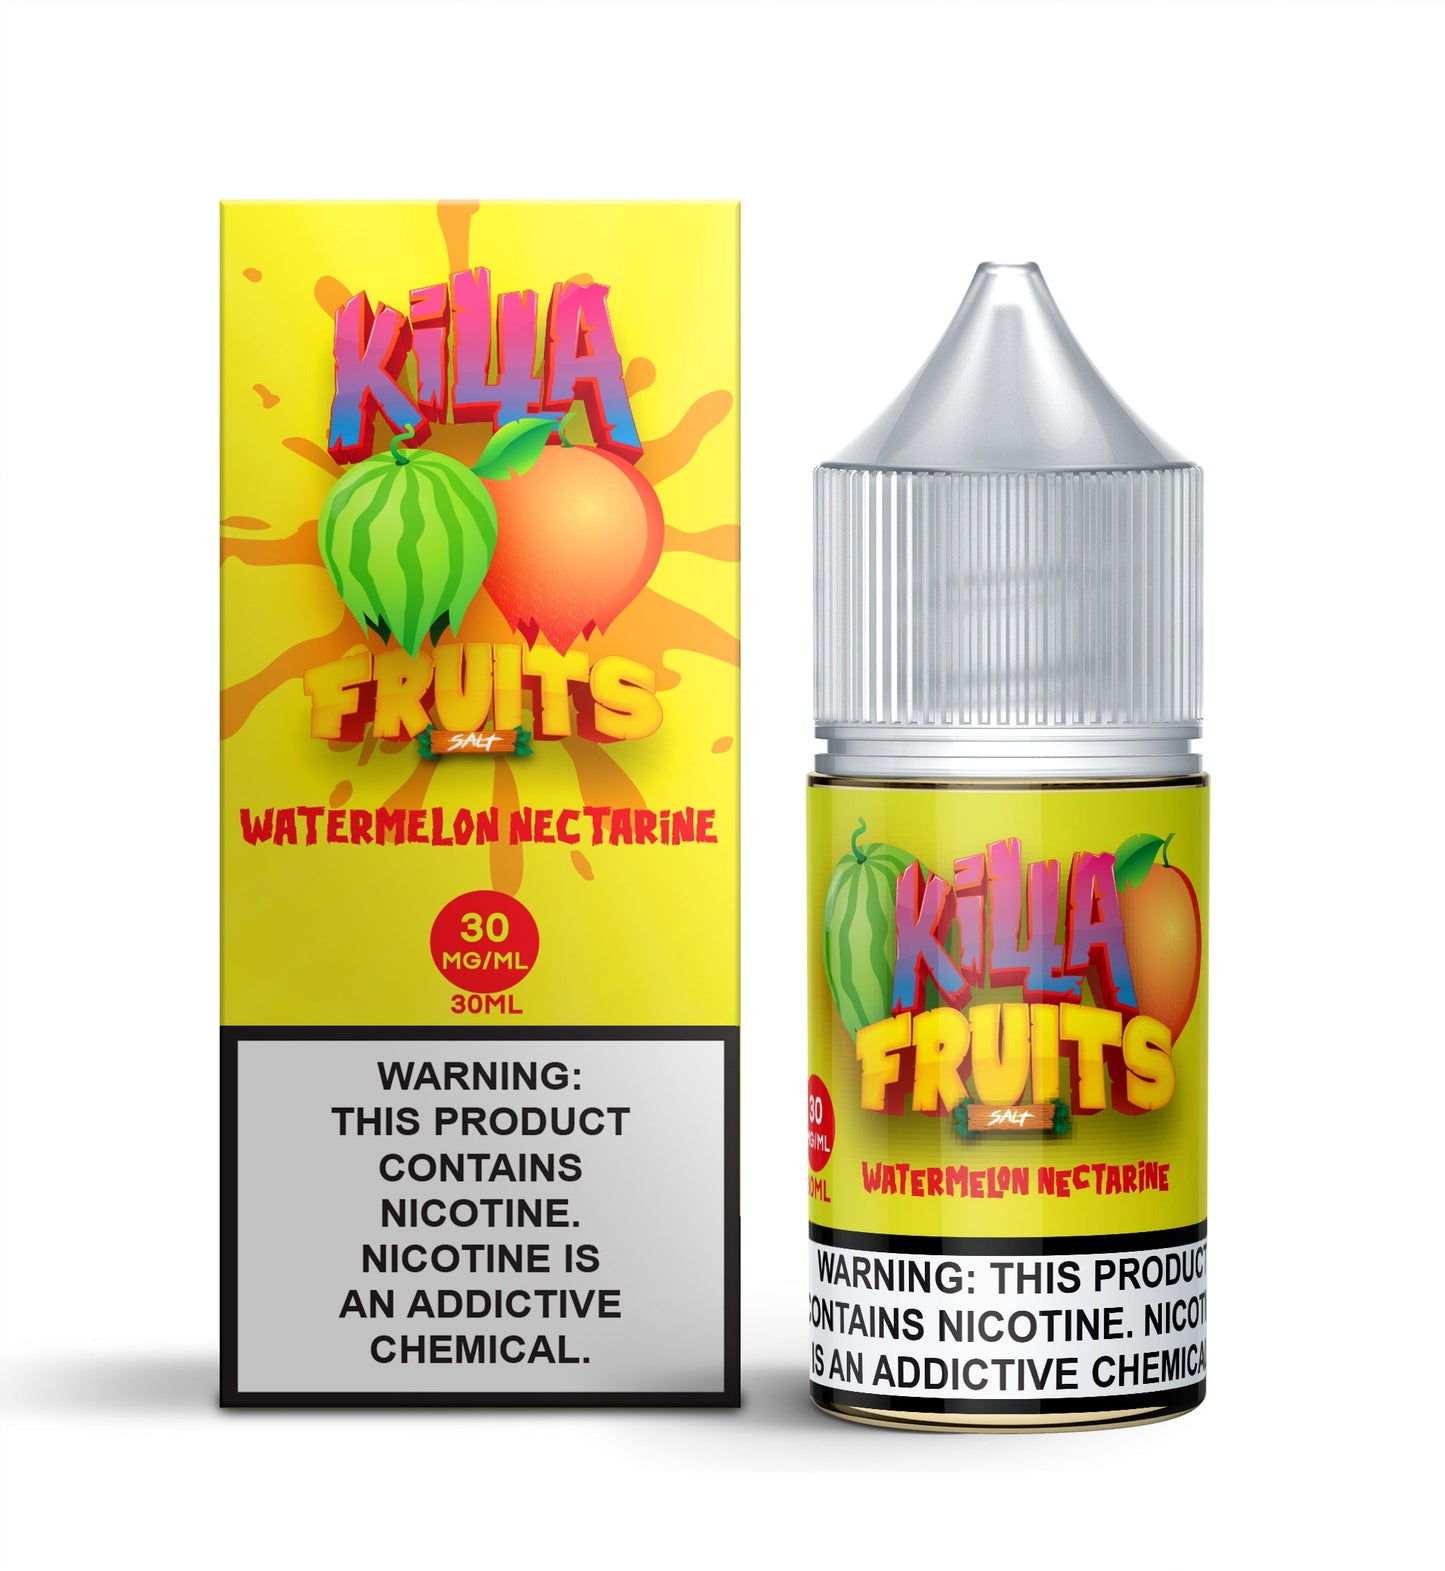 Watermelon Nectarine by Killa Fruits Salts Series 30mL with packaging